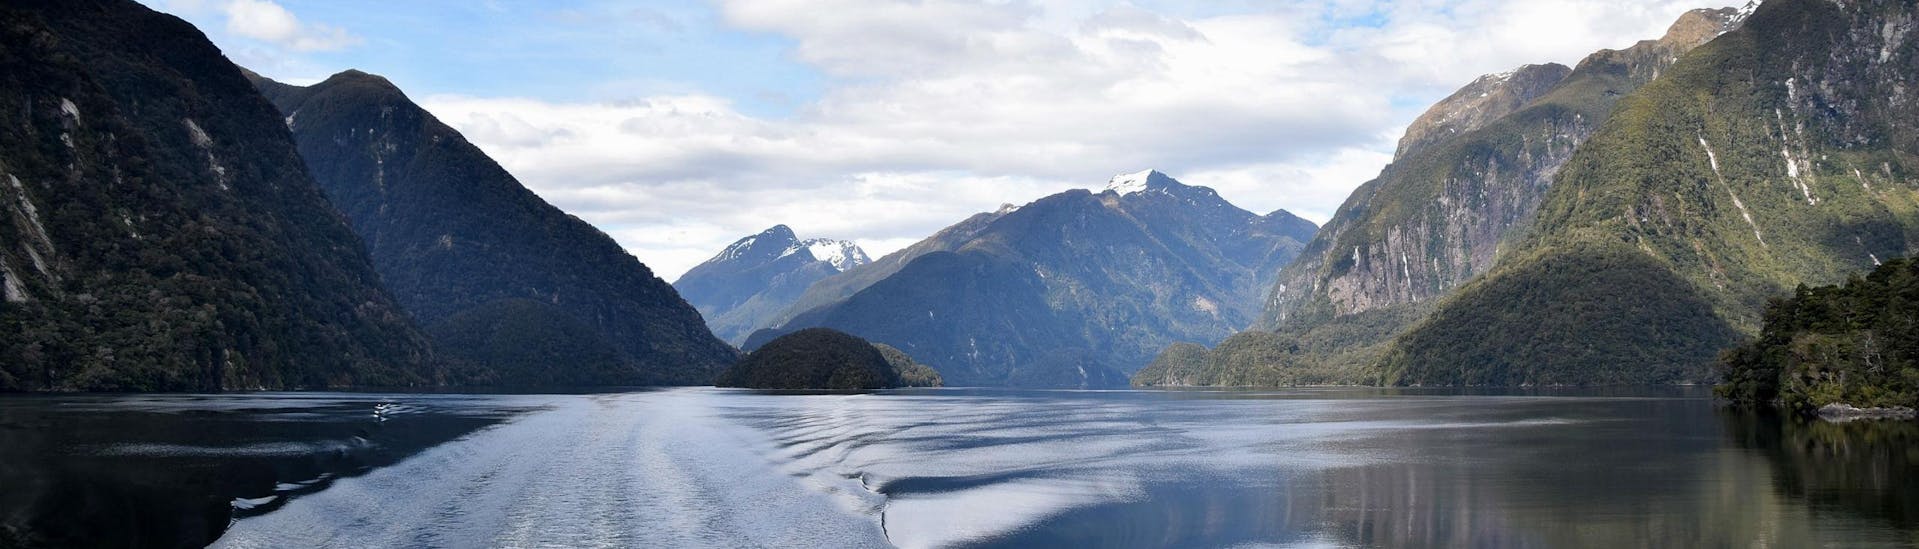 A boat trip in Doubtful Sound is a great activity for all those who wish to explore the beautiful landscape of New Zealand's South Island.